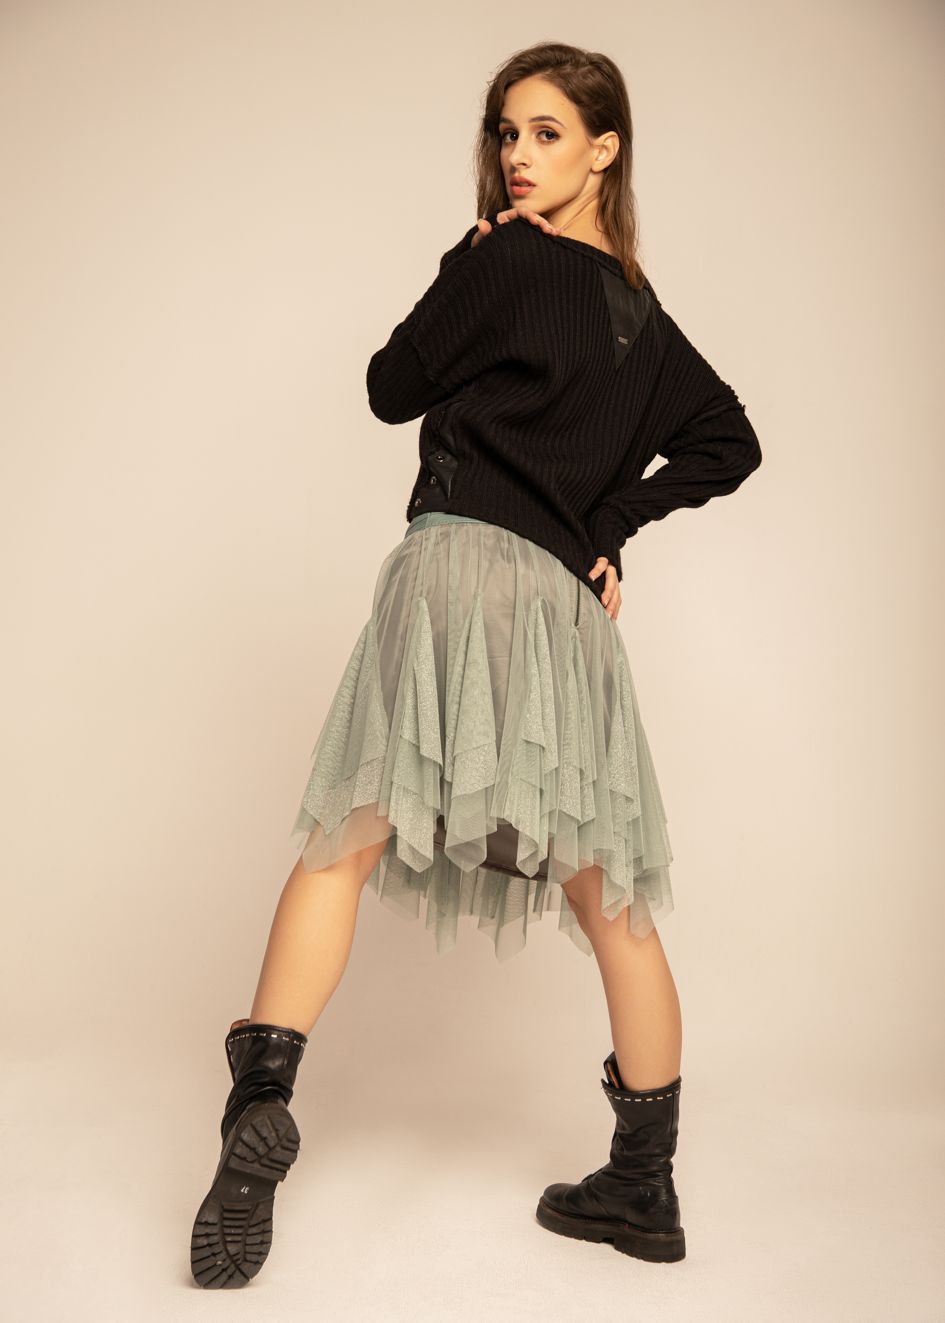 skirt made of tulle and leather, tulle skirt with a leather yoke with godets, yoke skirt made of Italian leather, skirt with a yoke made of natural leather and sage tulle, sage skirt with a yoke made of natural leather